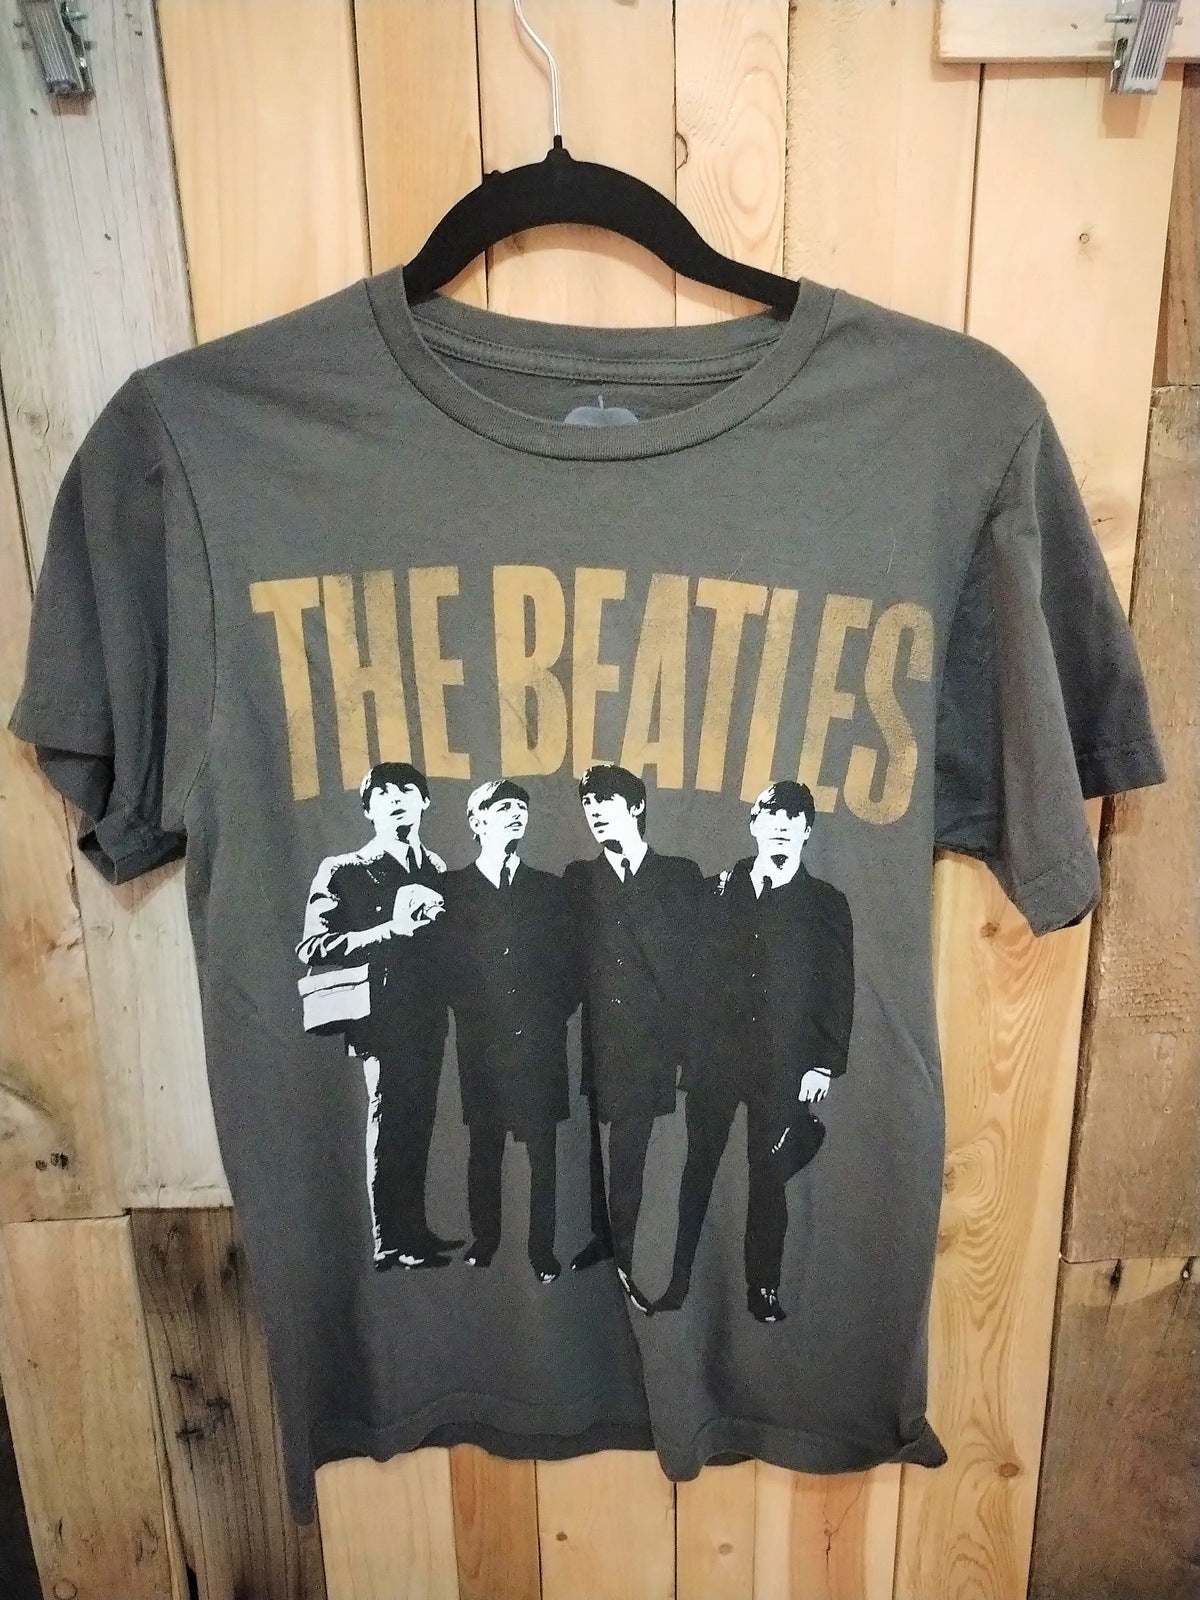 The Beatles Official Apple Corps. Merchandise T Shirt Size Small #331932